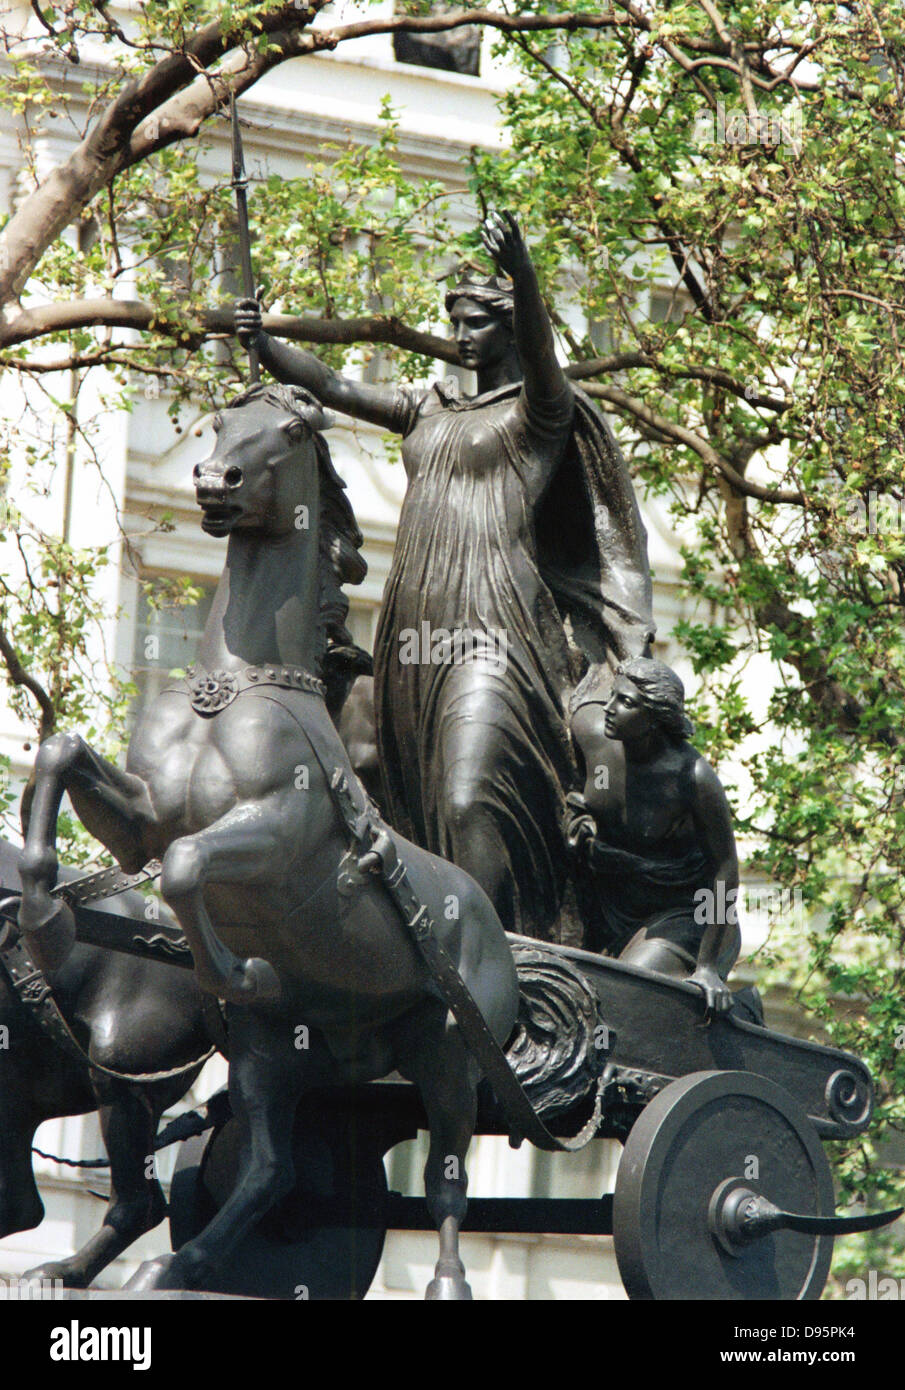 Boudicca (Boadicea) 1st century British queen of Iceni who led uprising against Romans. Statue of Boudicca and her daughters in chariot. Thames Embankment, London, England. Stock Photo